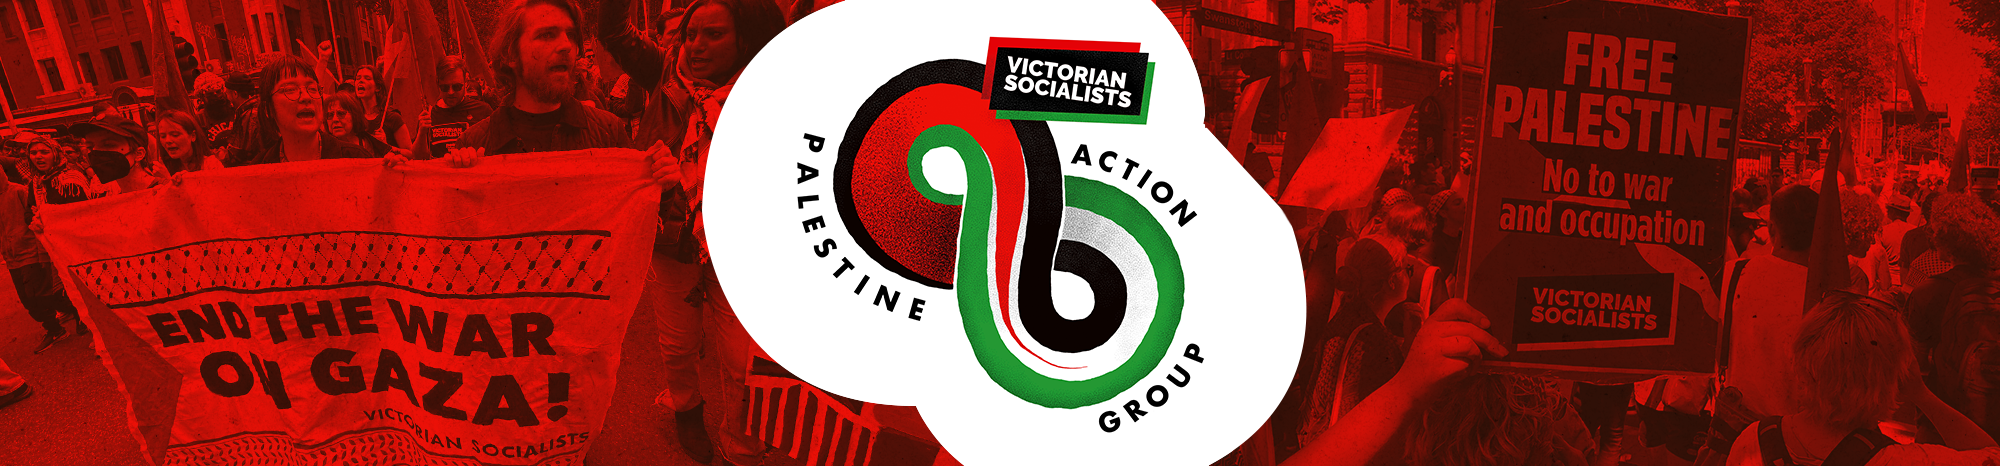 Palestine Action Group